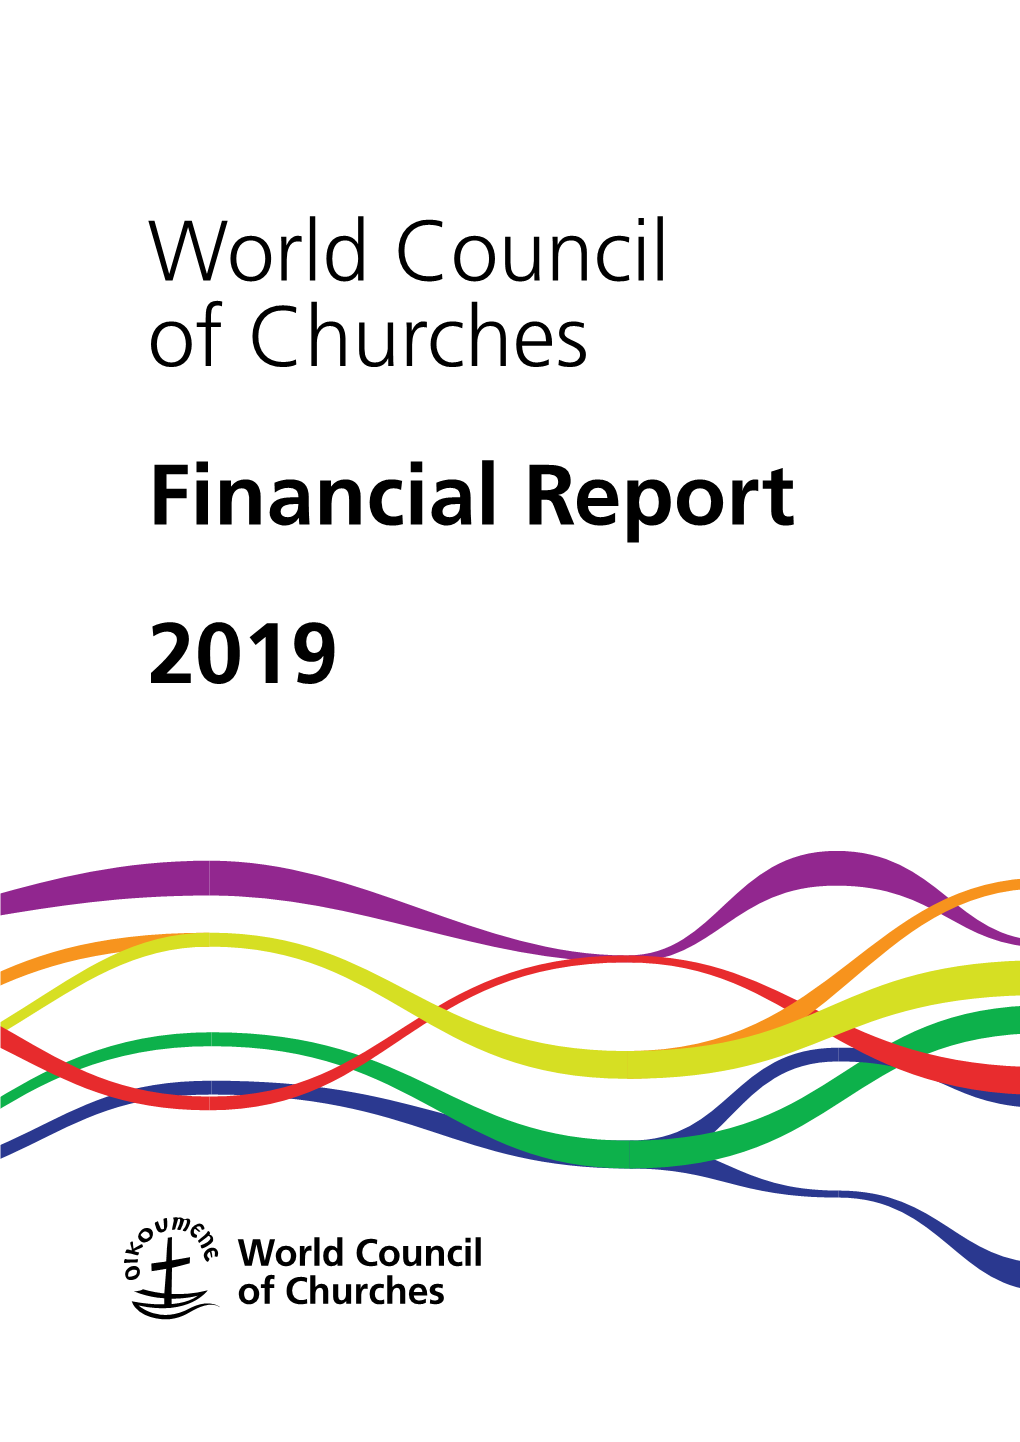 World Council of Churches Financial Report 2019 Contents